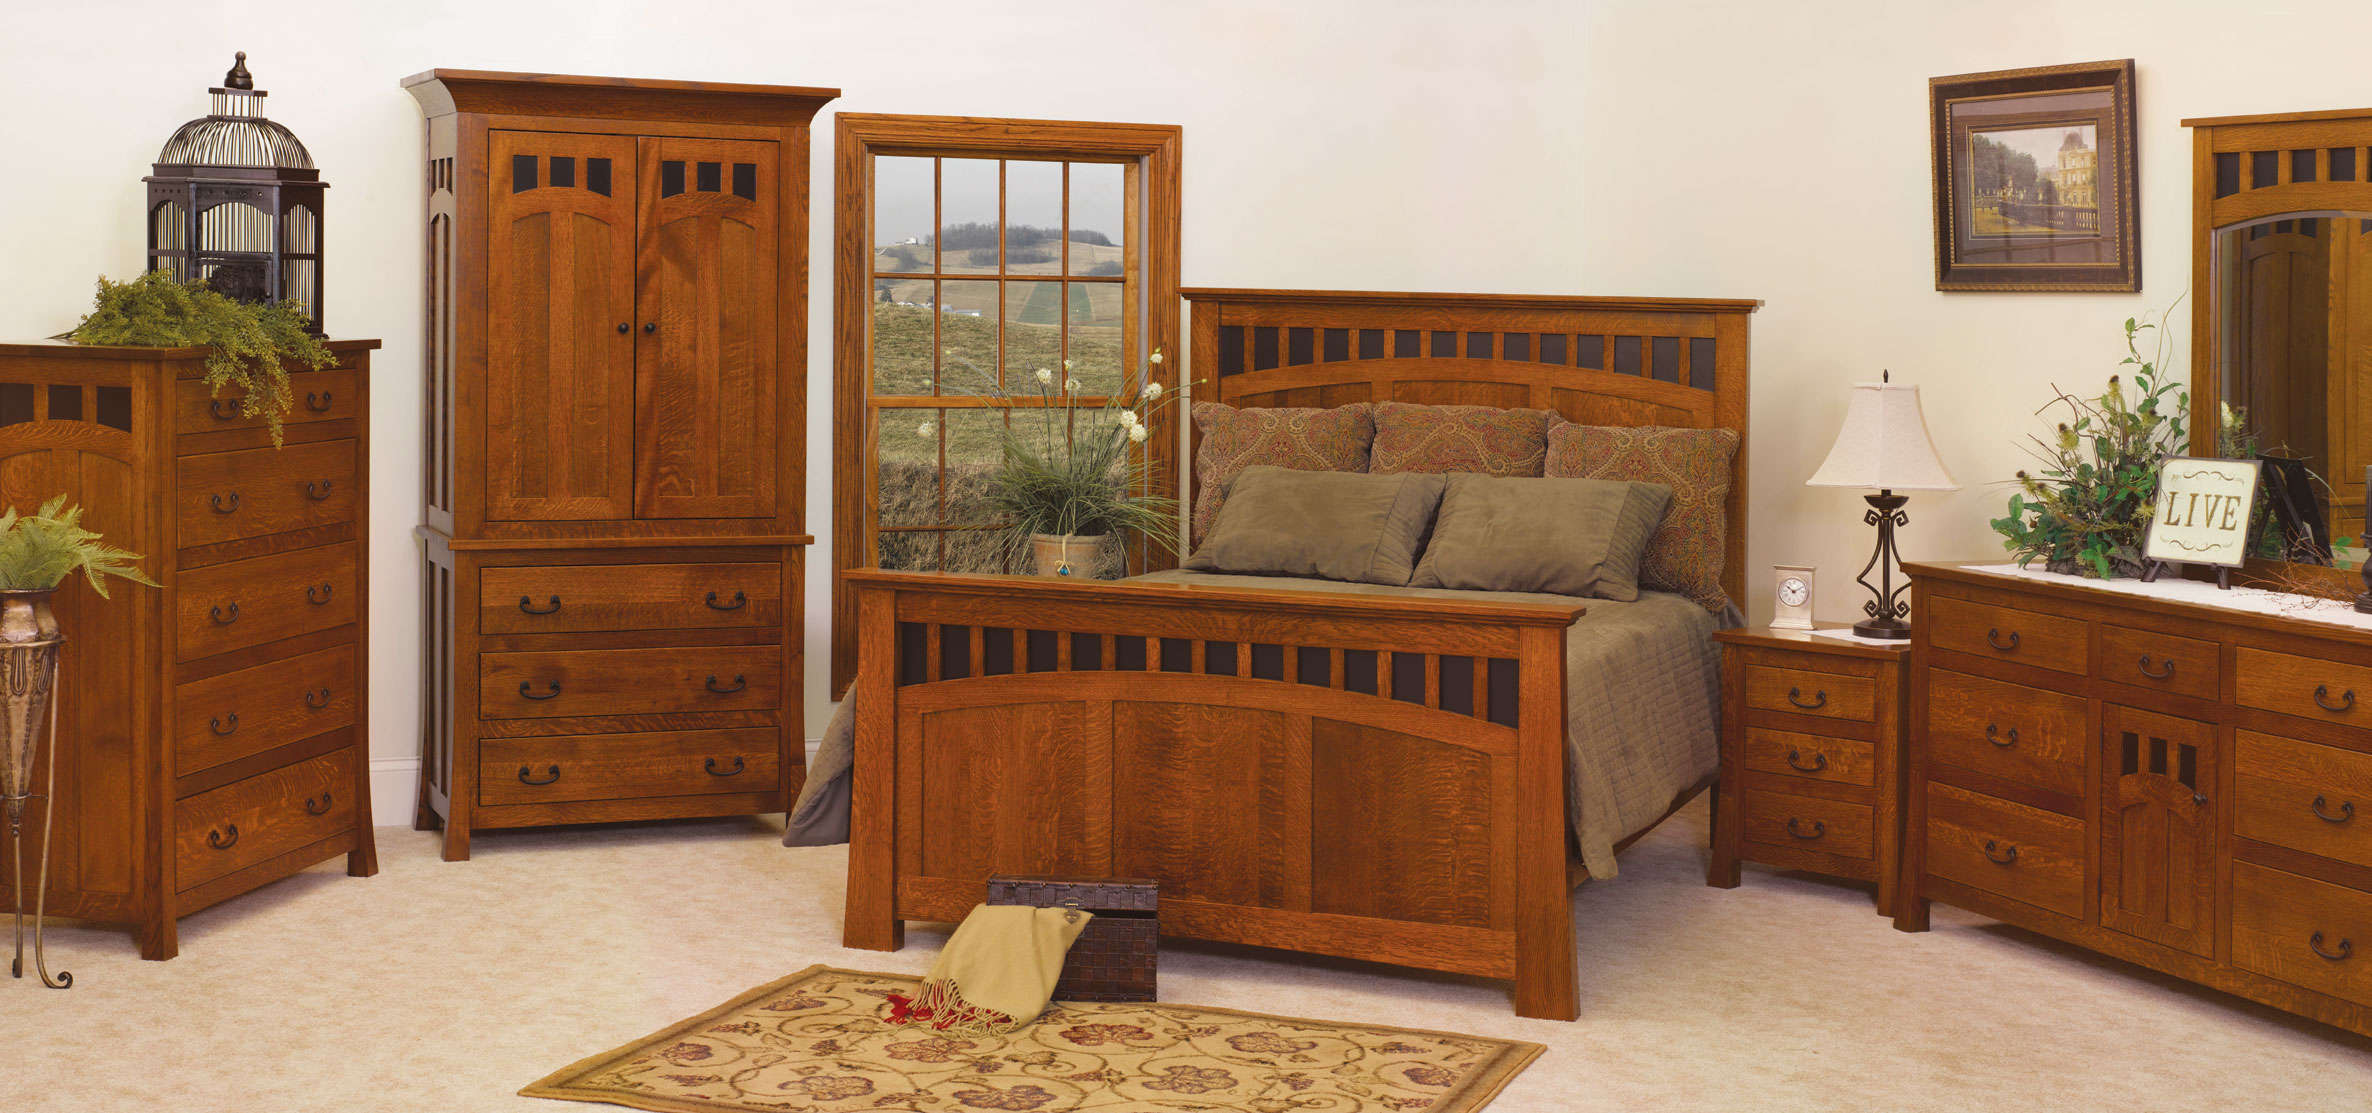 thing to know about best wooden furniture - tcg kfjifnj BCBSAZO